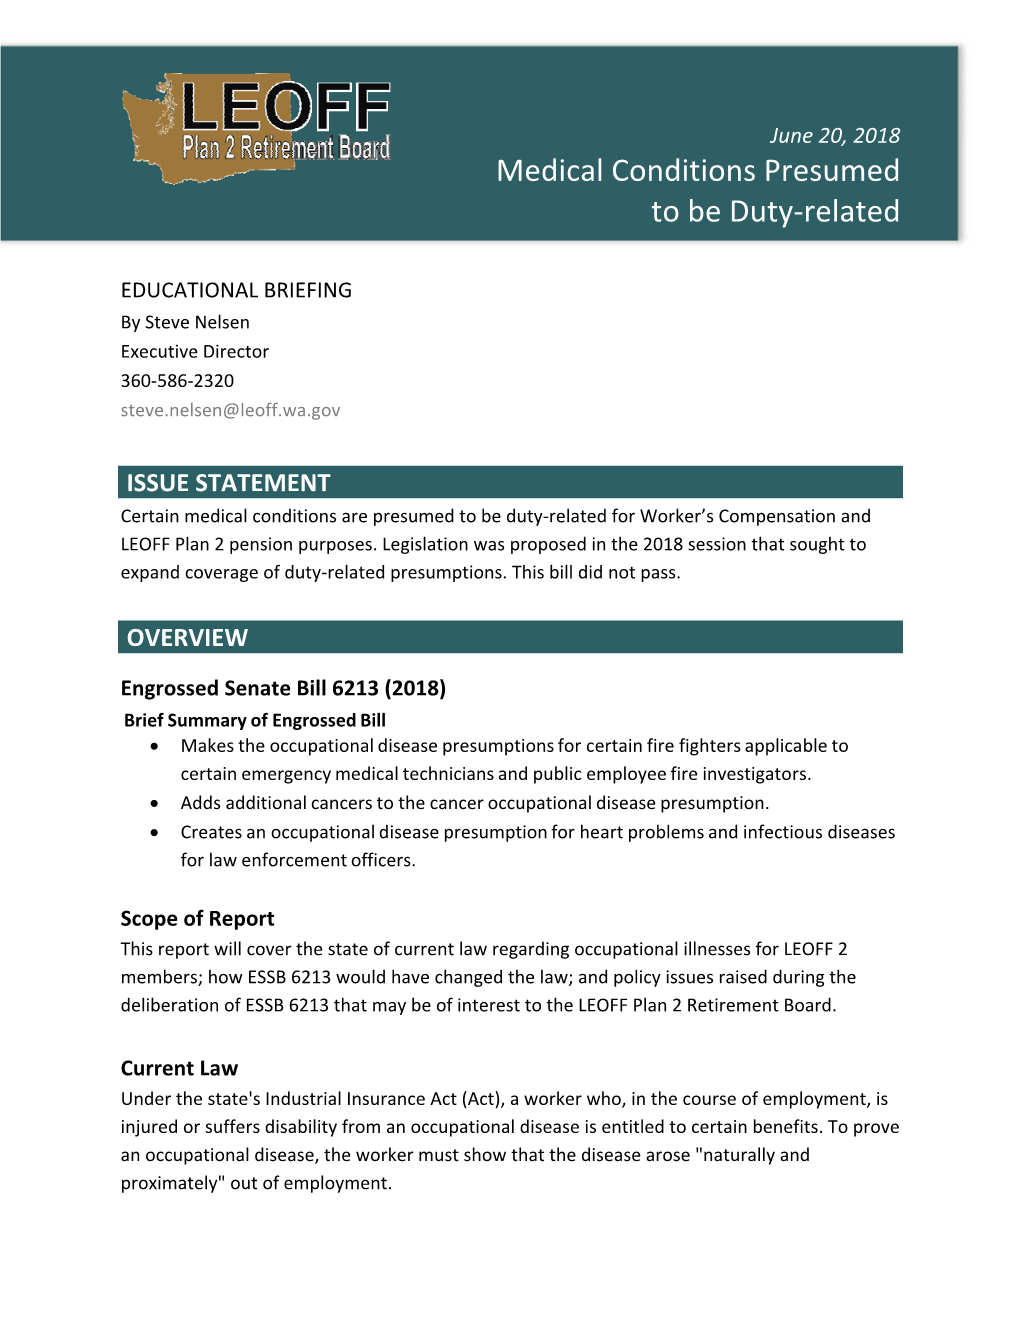 Medical Conditions Presumed to Be Duty-Related Educational Briefing June 20, 2018 Clickissue Tostatement Edit Master Title Style